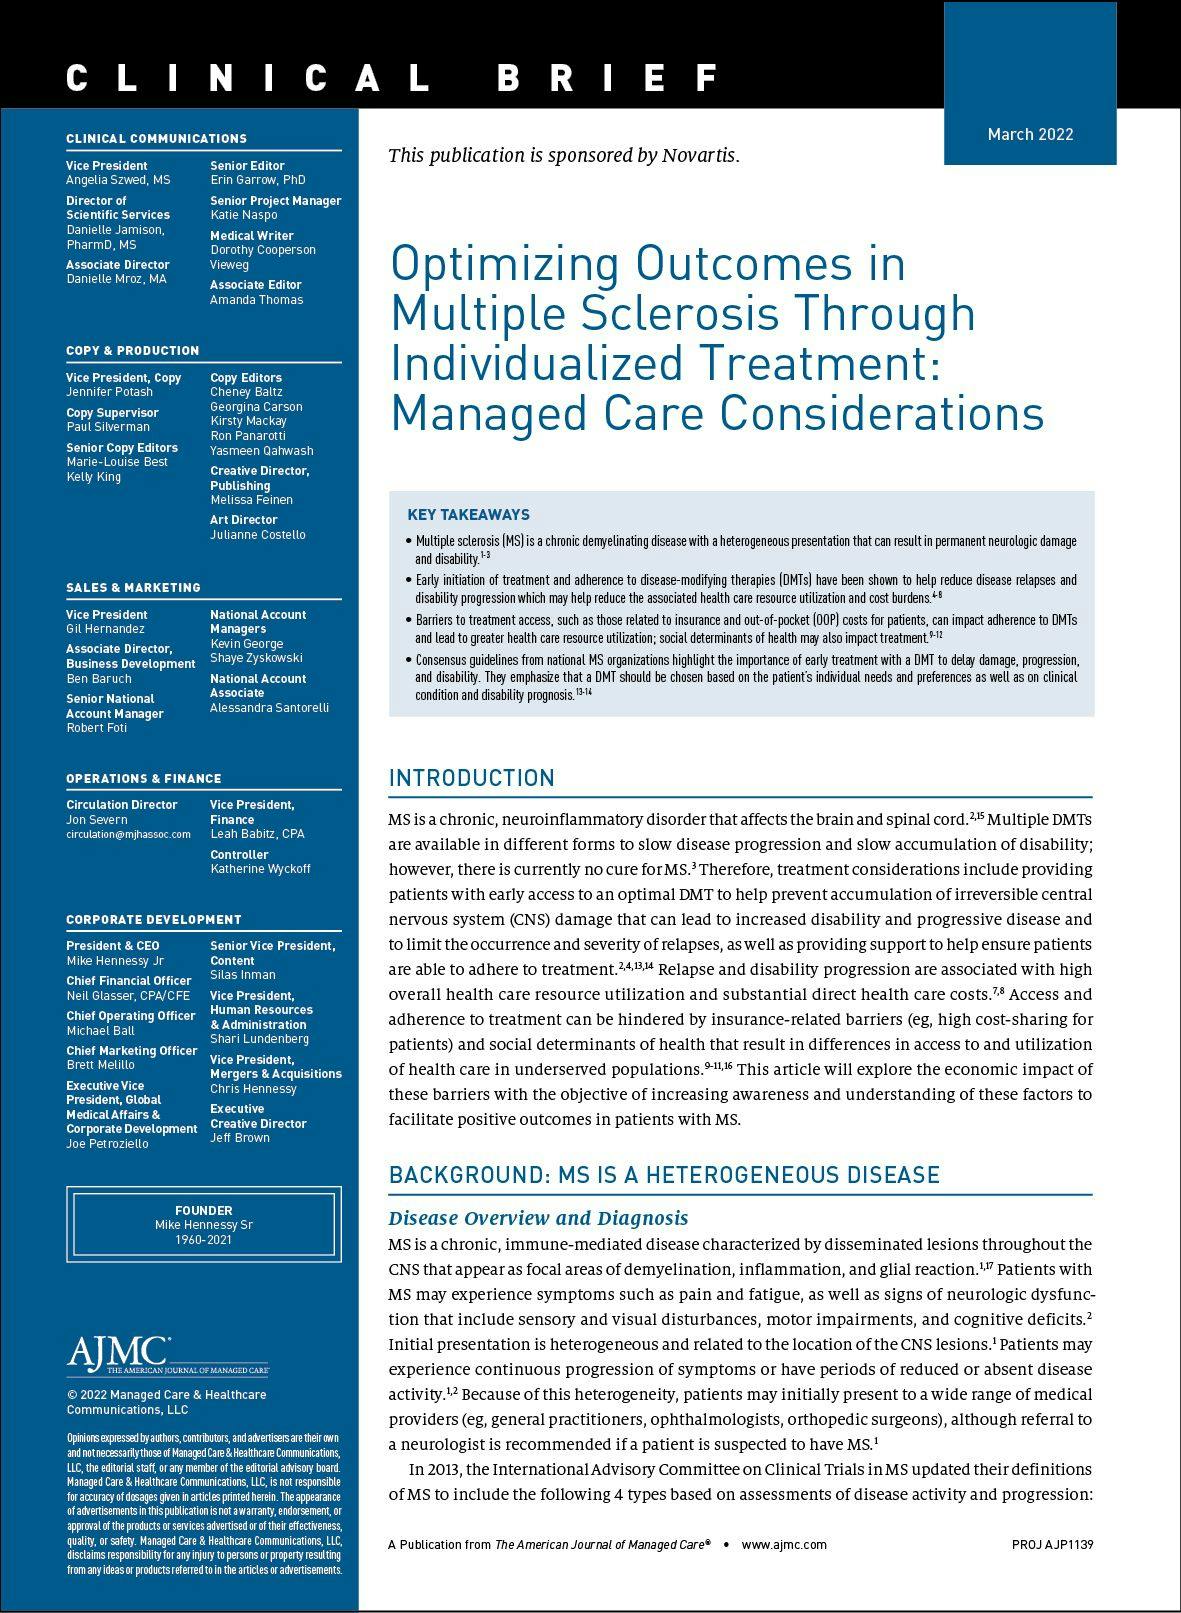 Optimizing Outcomes in Multiple Sclerosis Through Individualized Treatment: Managed Care Considerations